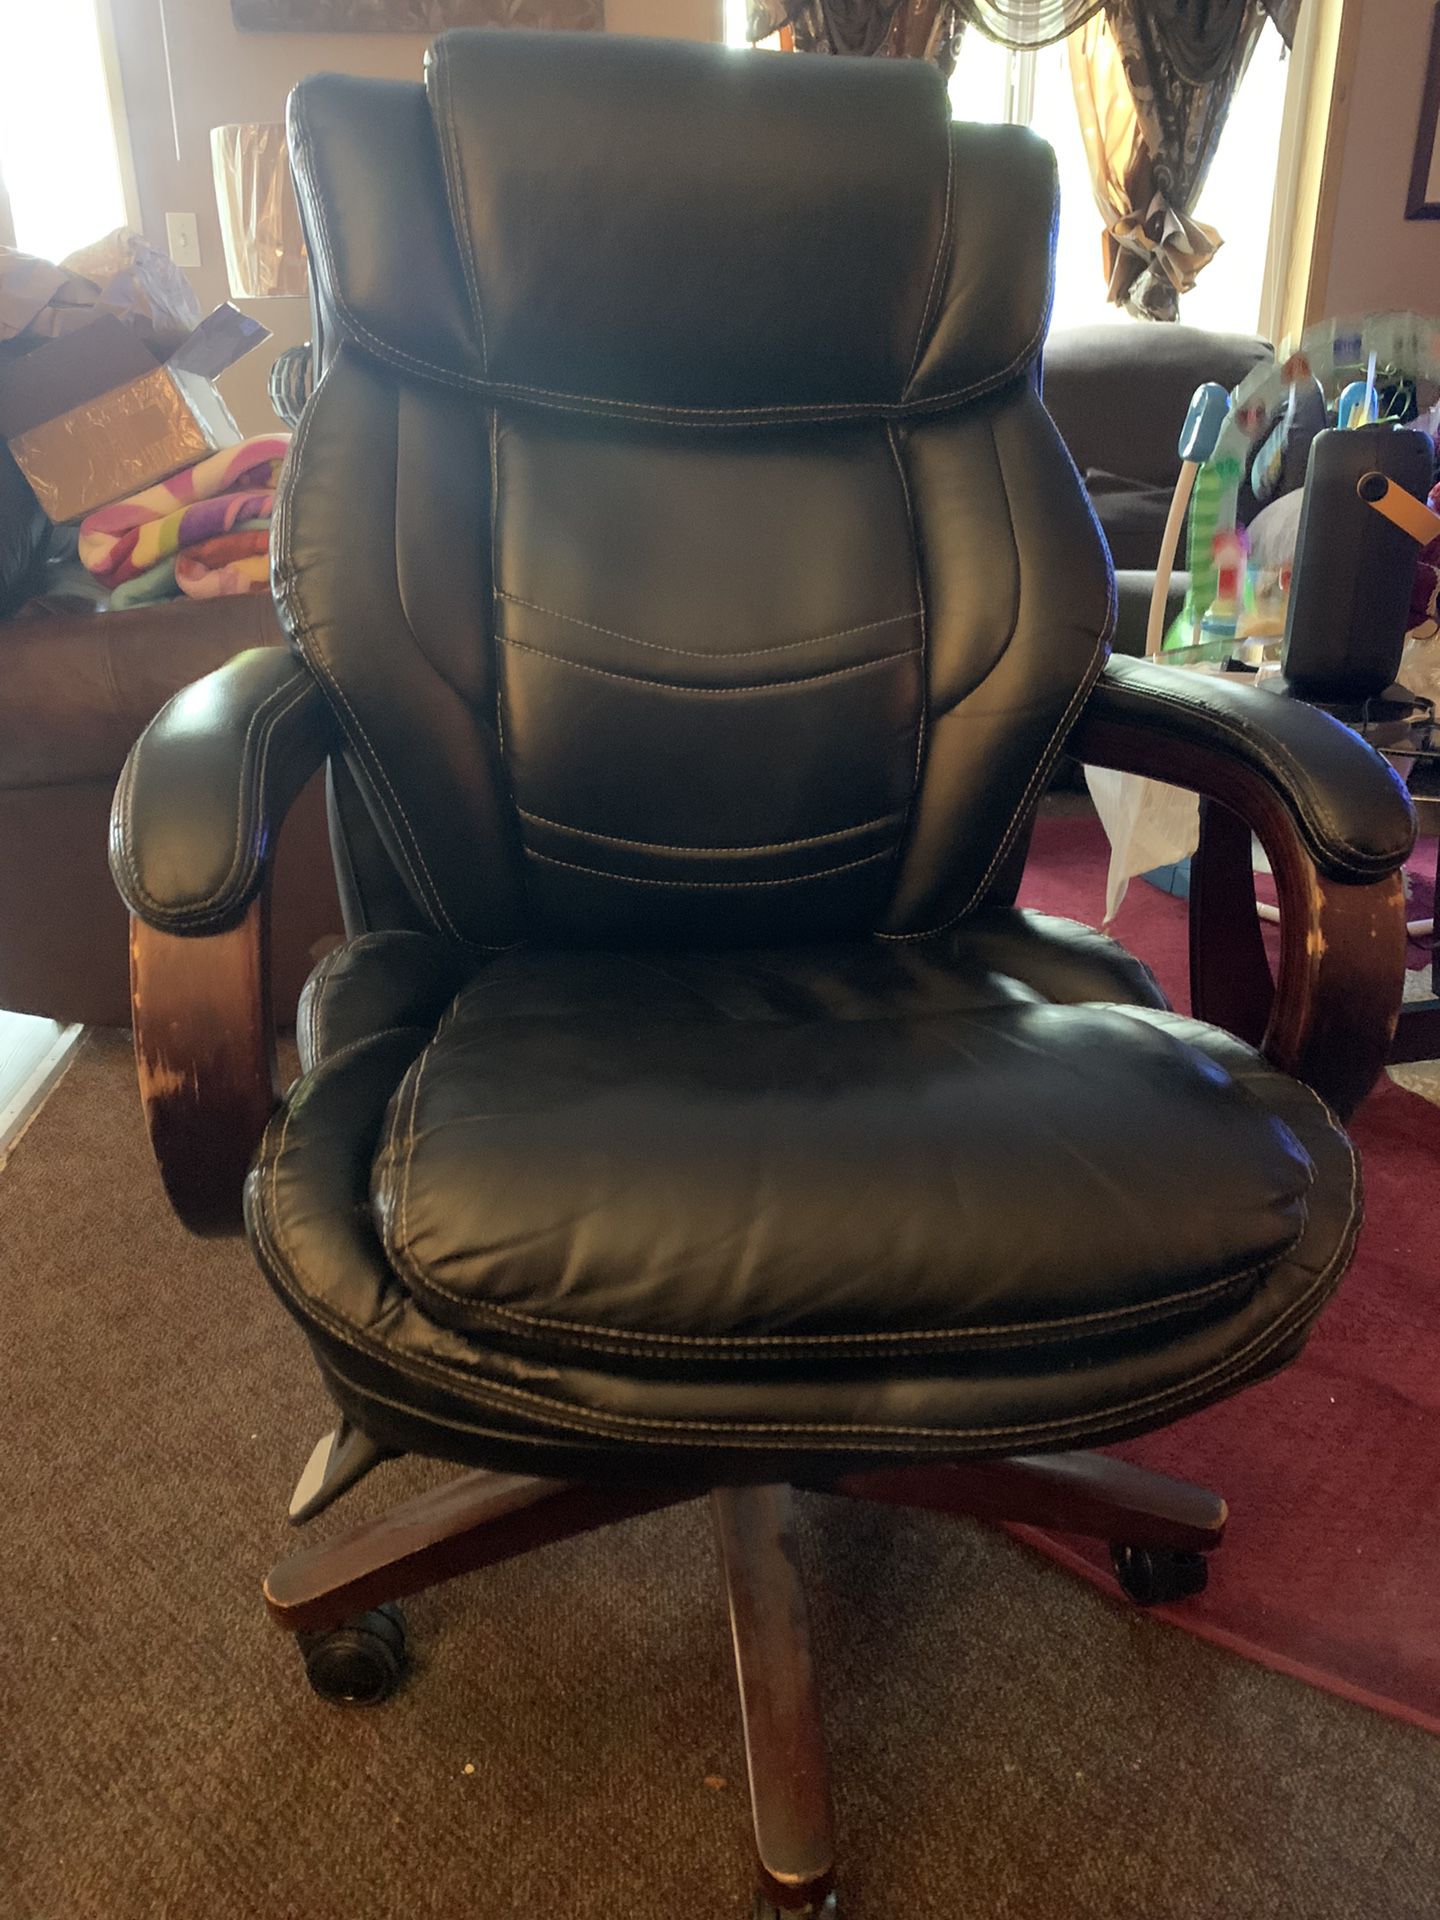  Lazyboy Black leather, rolling chair